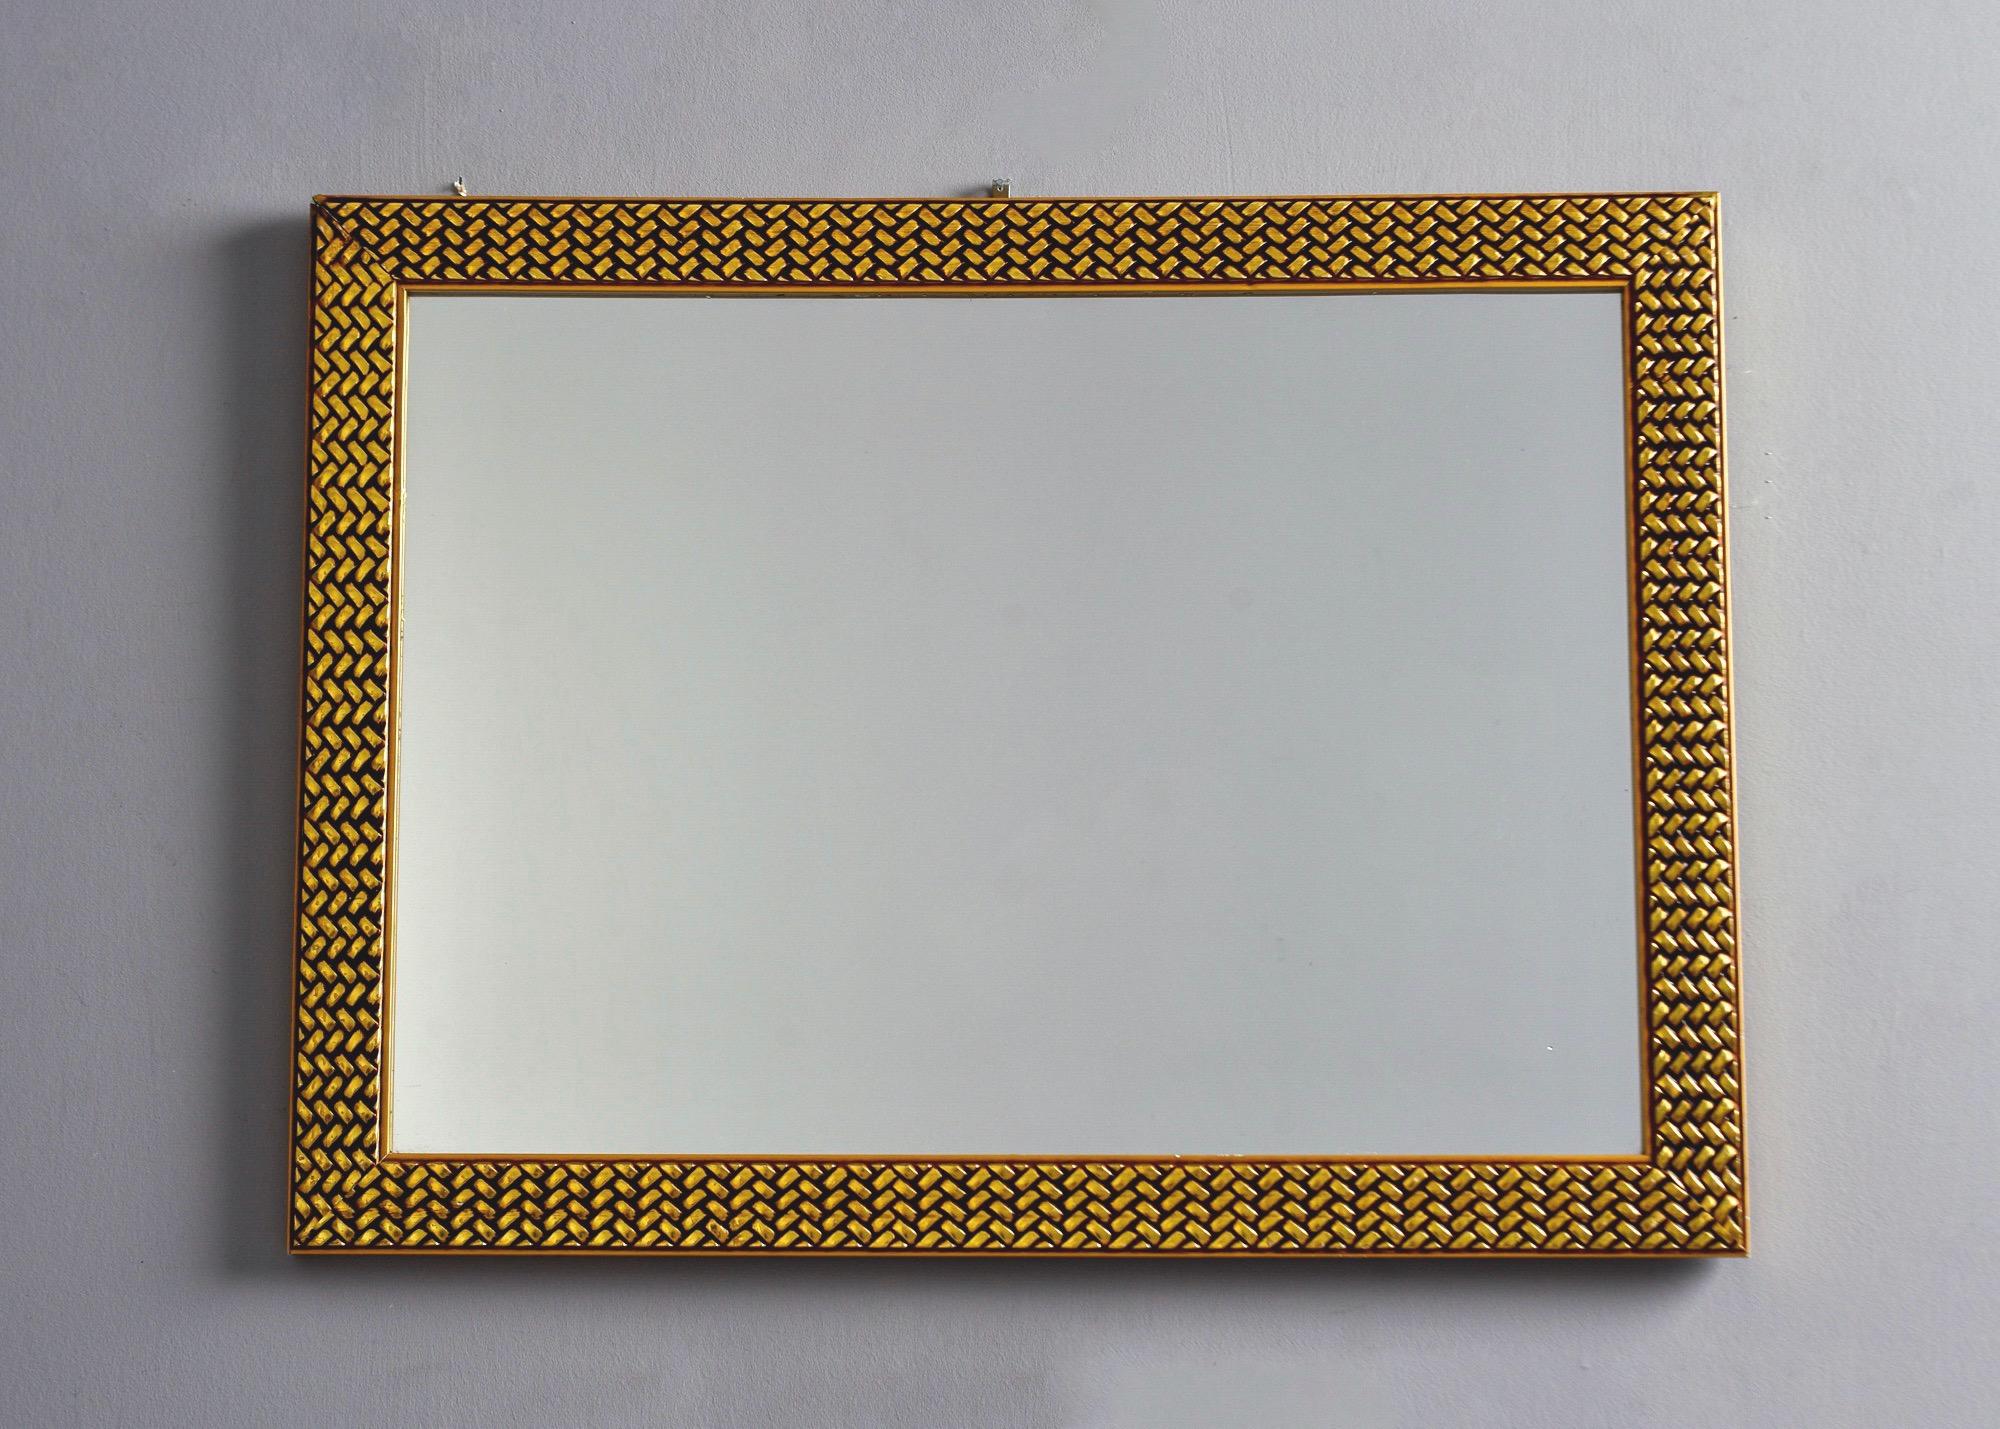 European Midcentury Mirror with Woven Texture Gilded Finish Frame